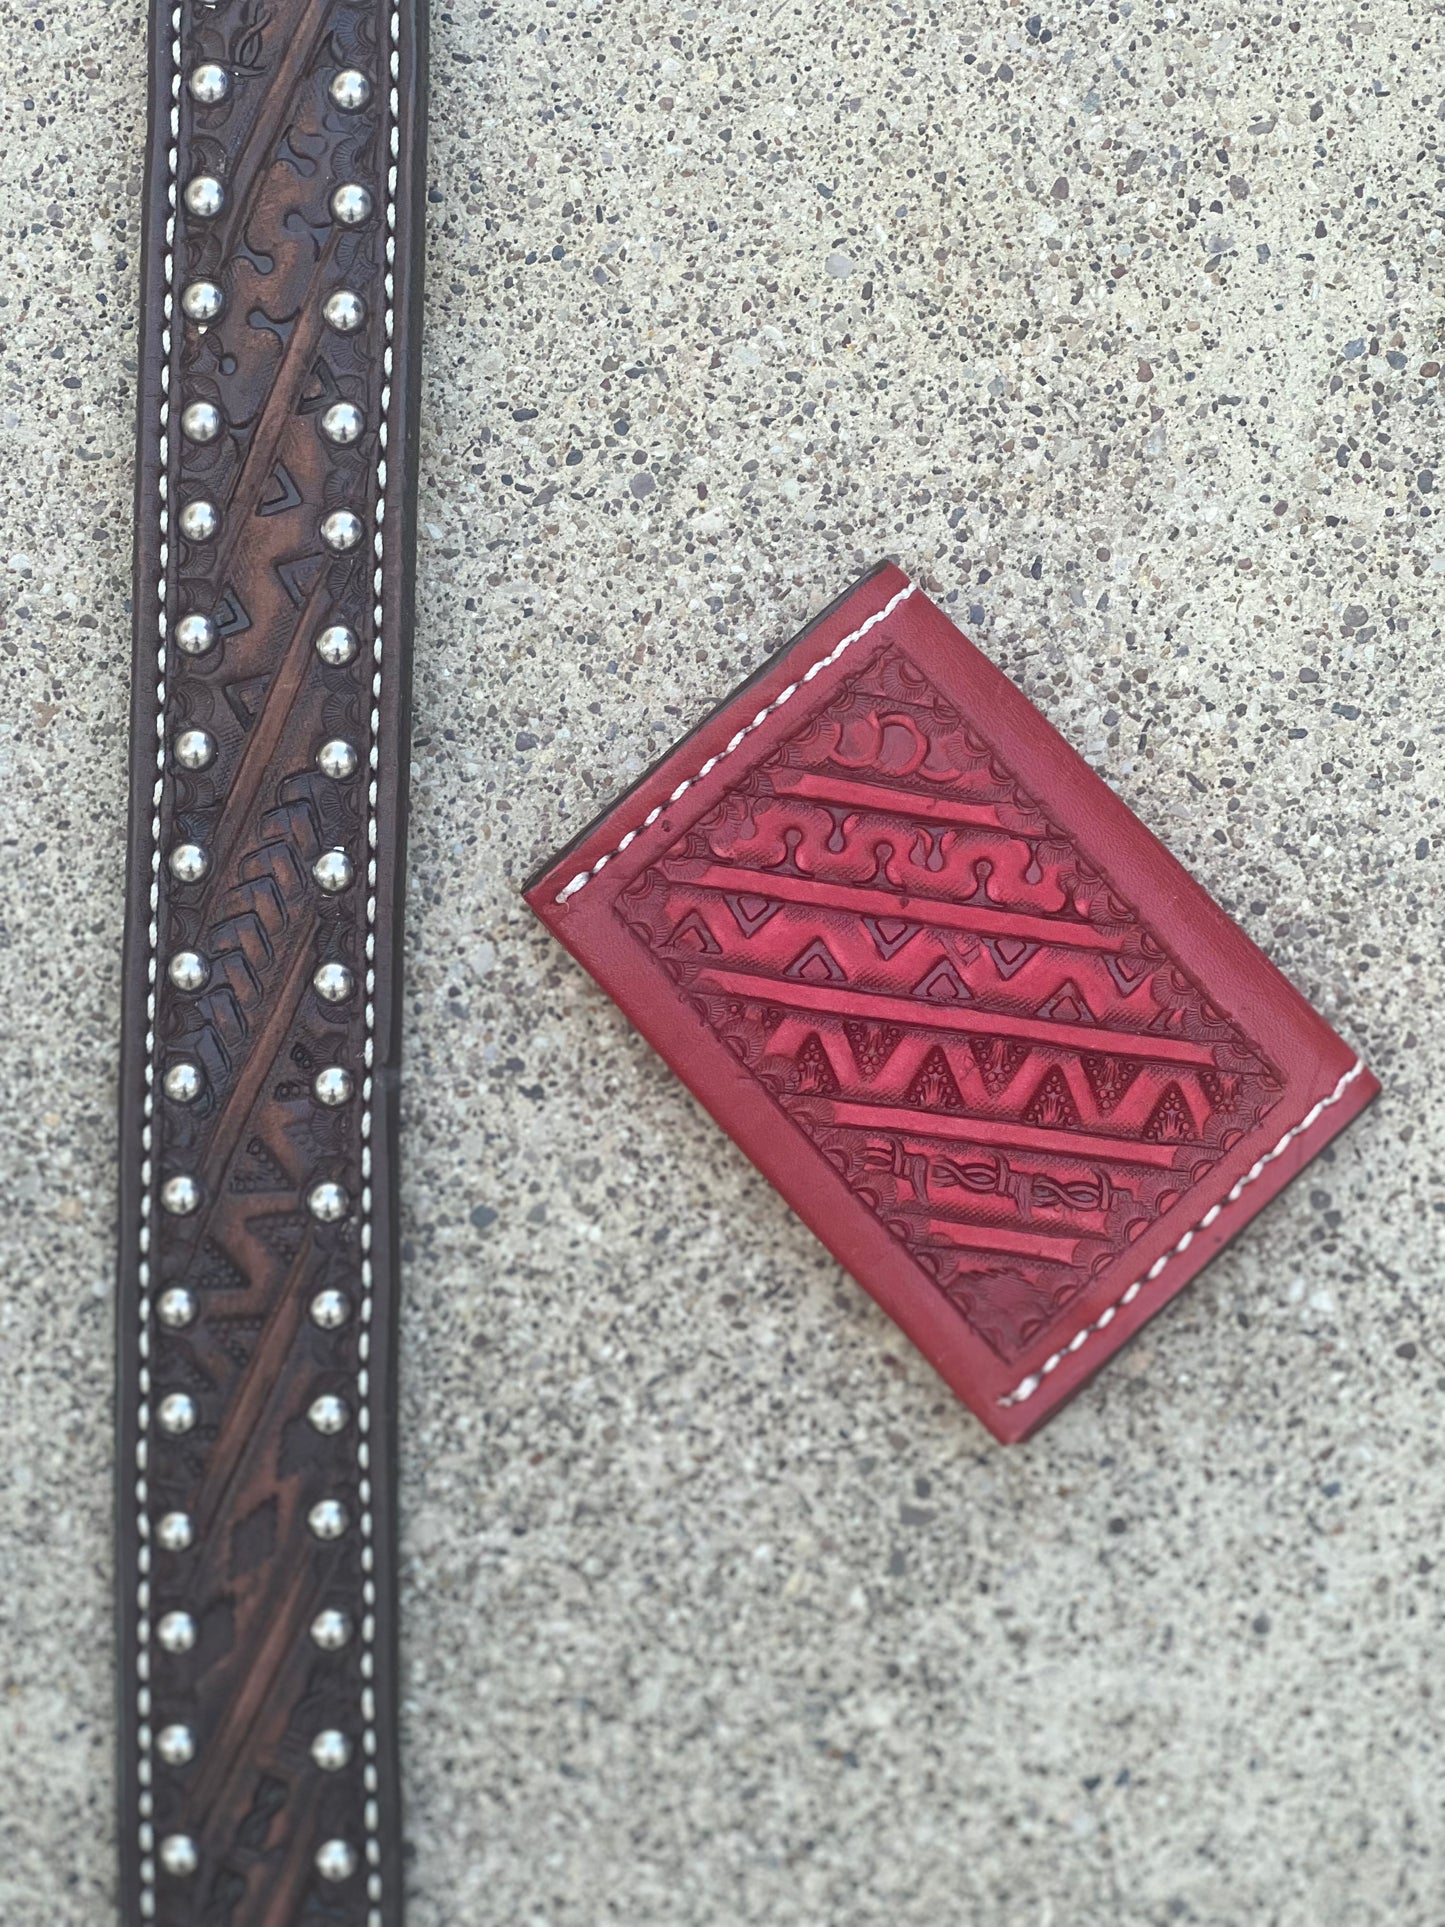 Leather purse straps (STRAP ONLY!!!) MULTIPLE LENGTH OPTIONS